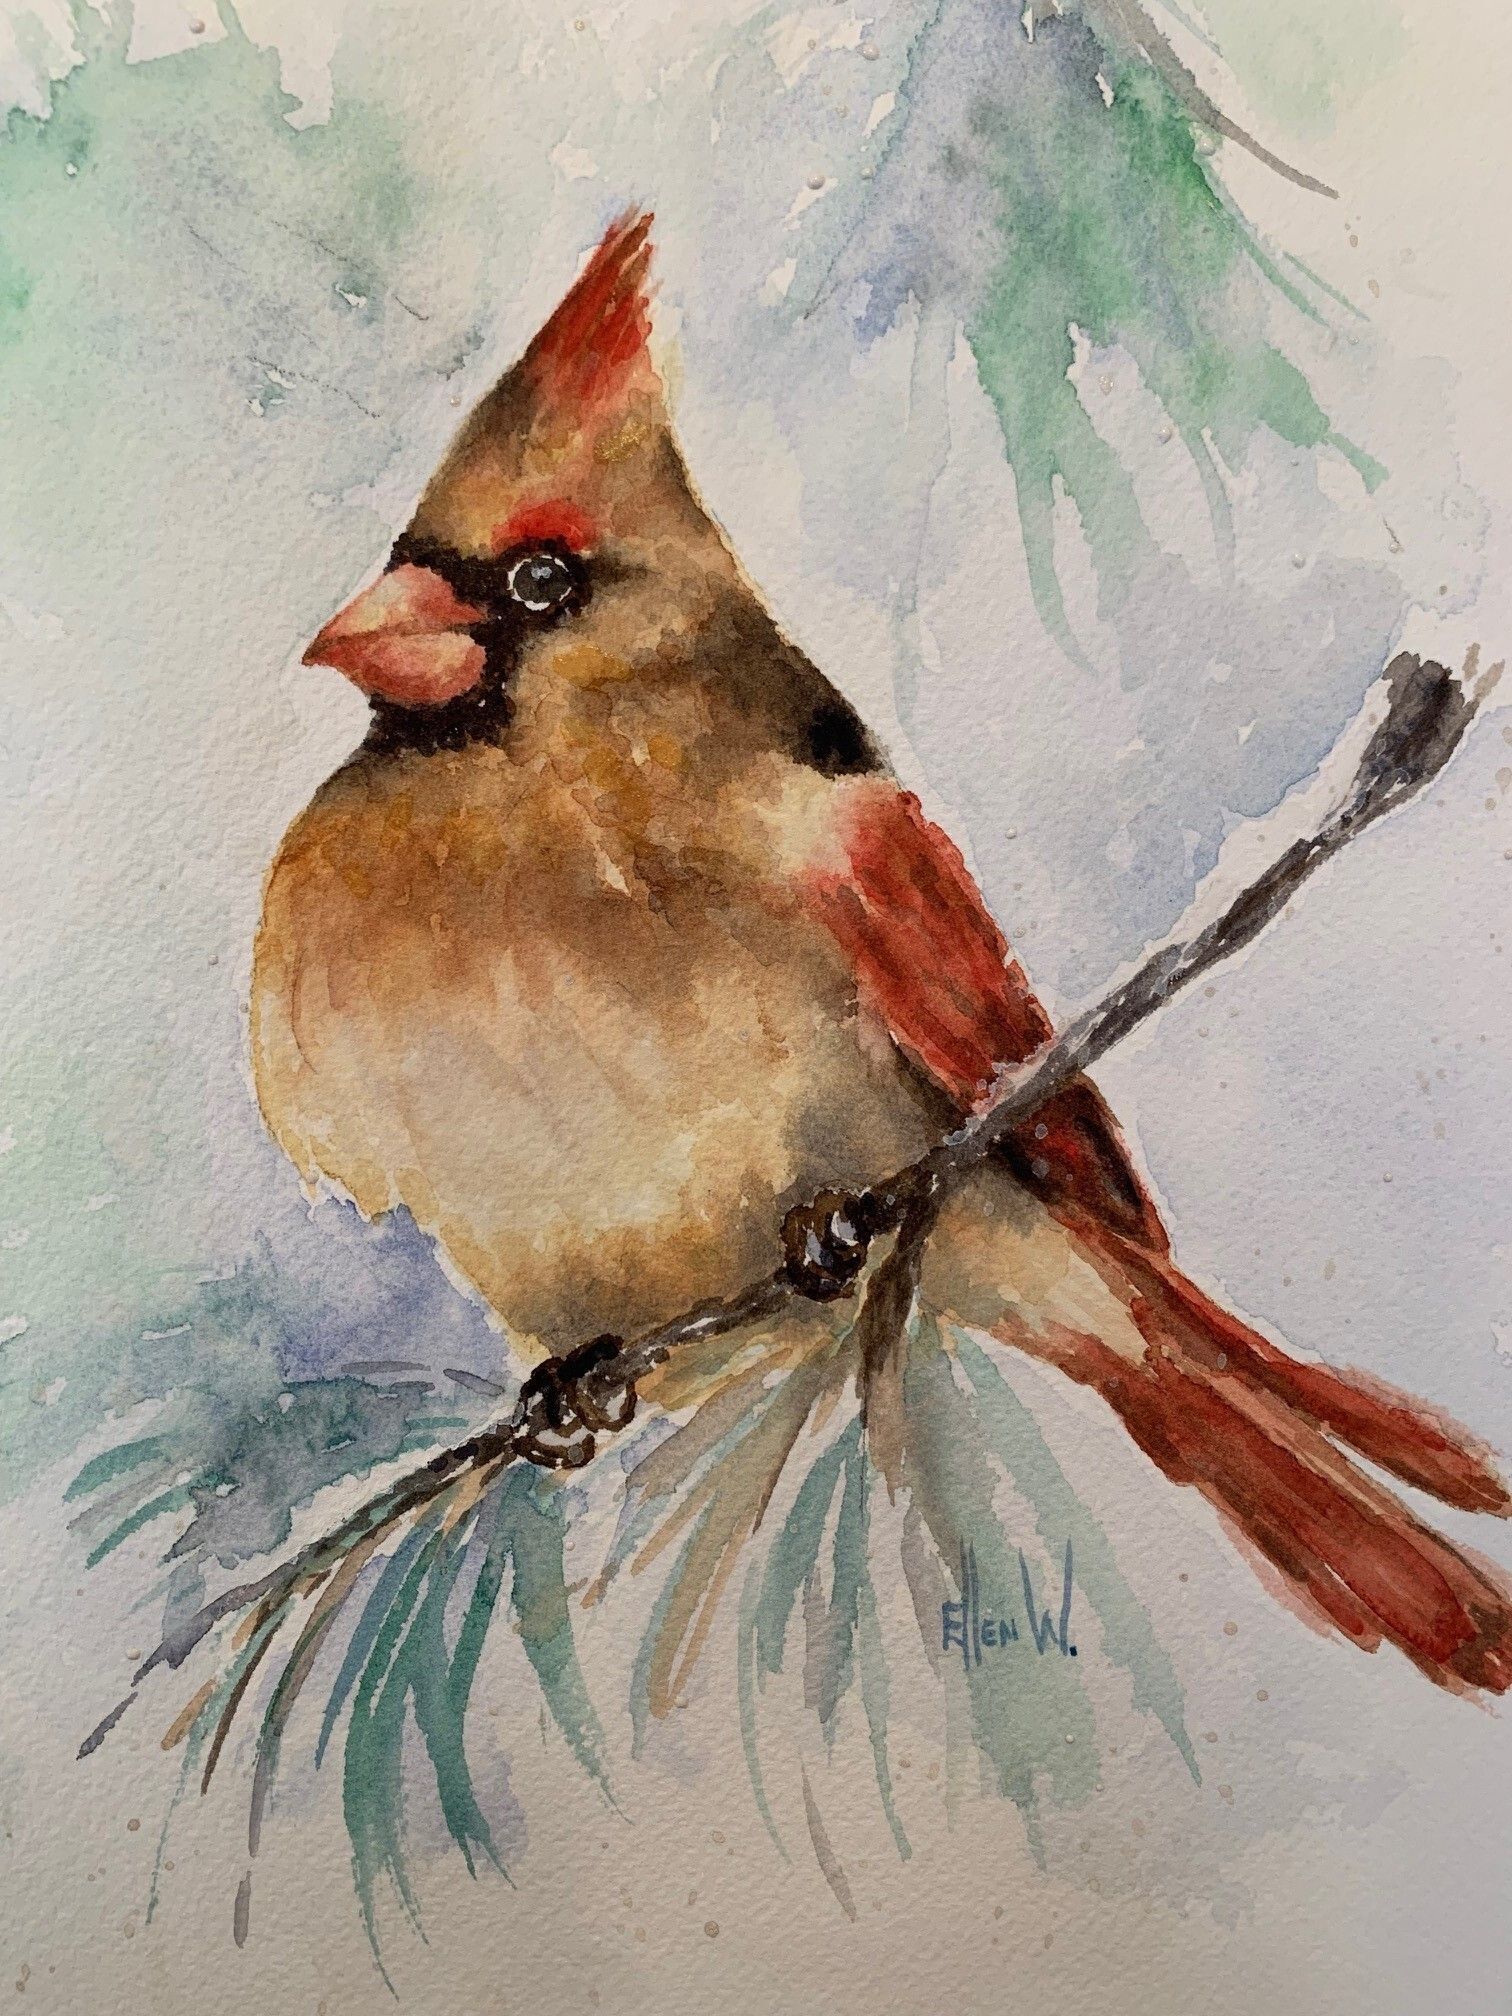 Female cardinal is sitting on a small pine twig with needles